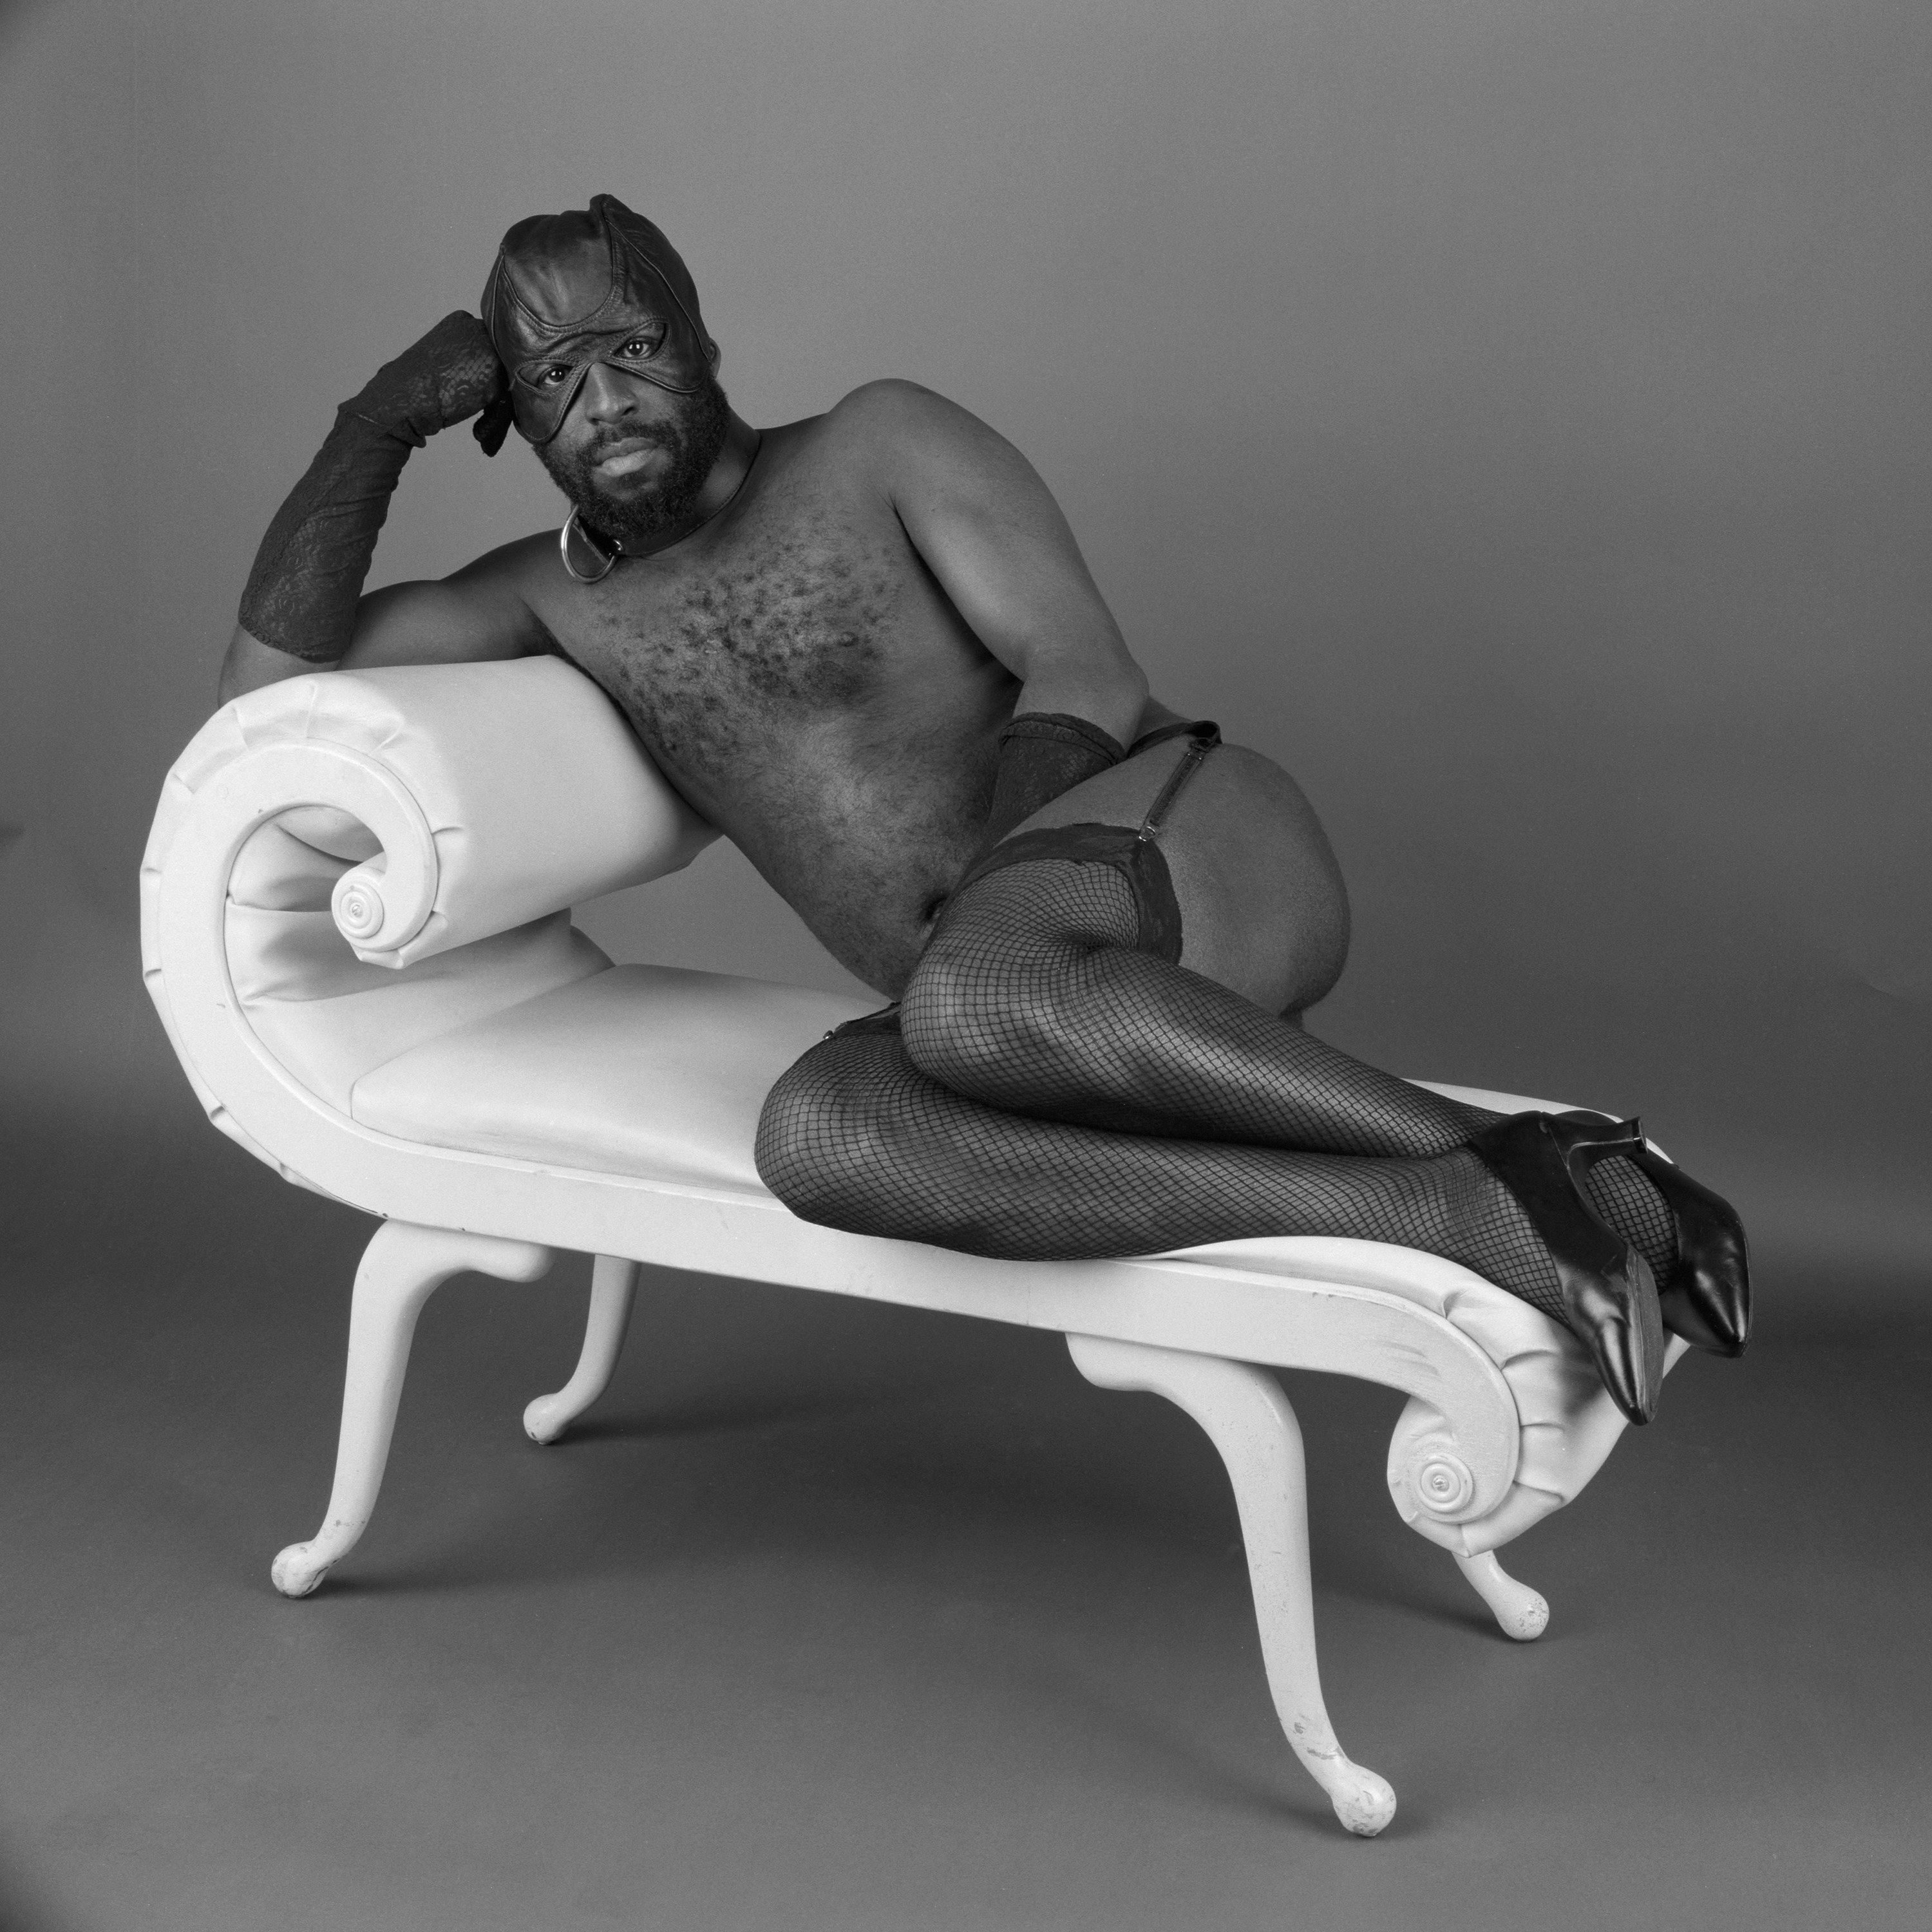 &quot;Self-Portrait on Chez Lounge, 1998&quot;: The artist lies on his side, resting his hand on his long-gloved hand, on a chaise longue wearing fishnet stockings and heels only